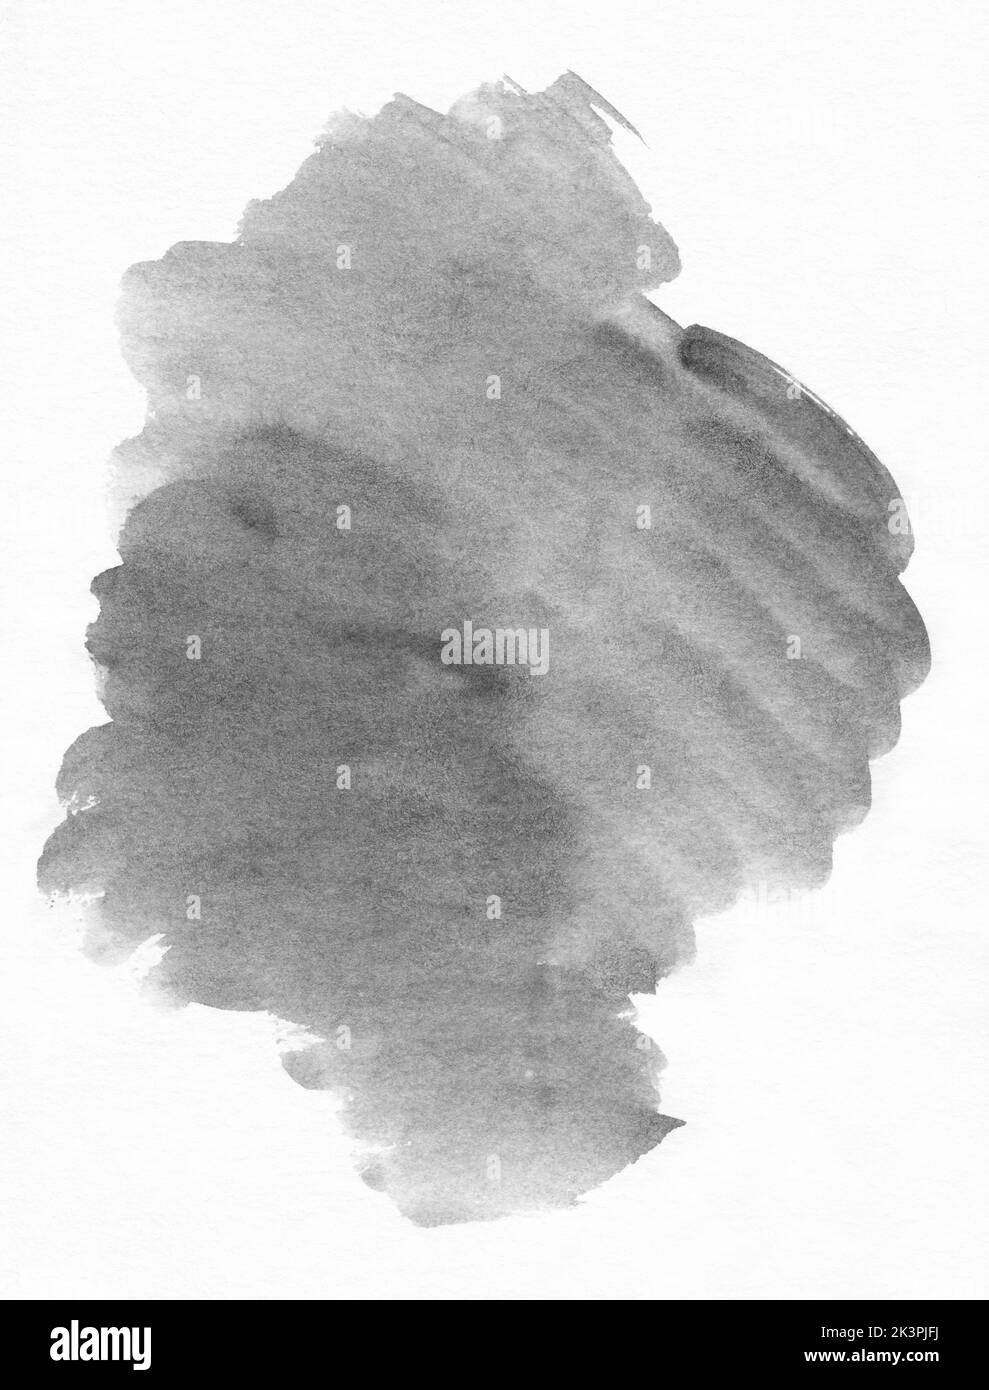 Watercolor gray spot on white background texture. Grey stains on paper overlay. Stock Photo